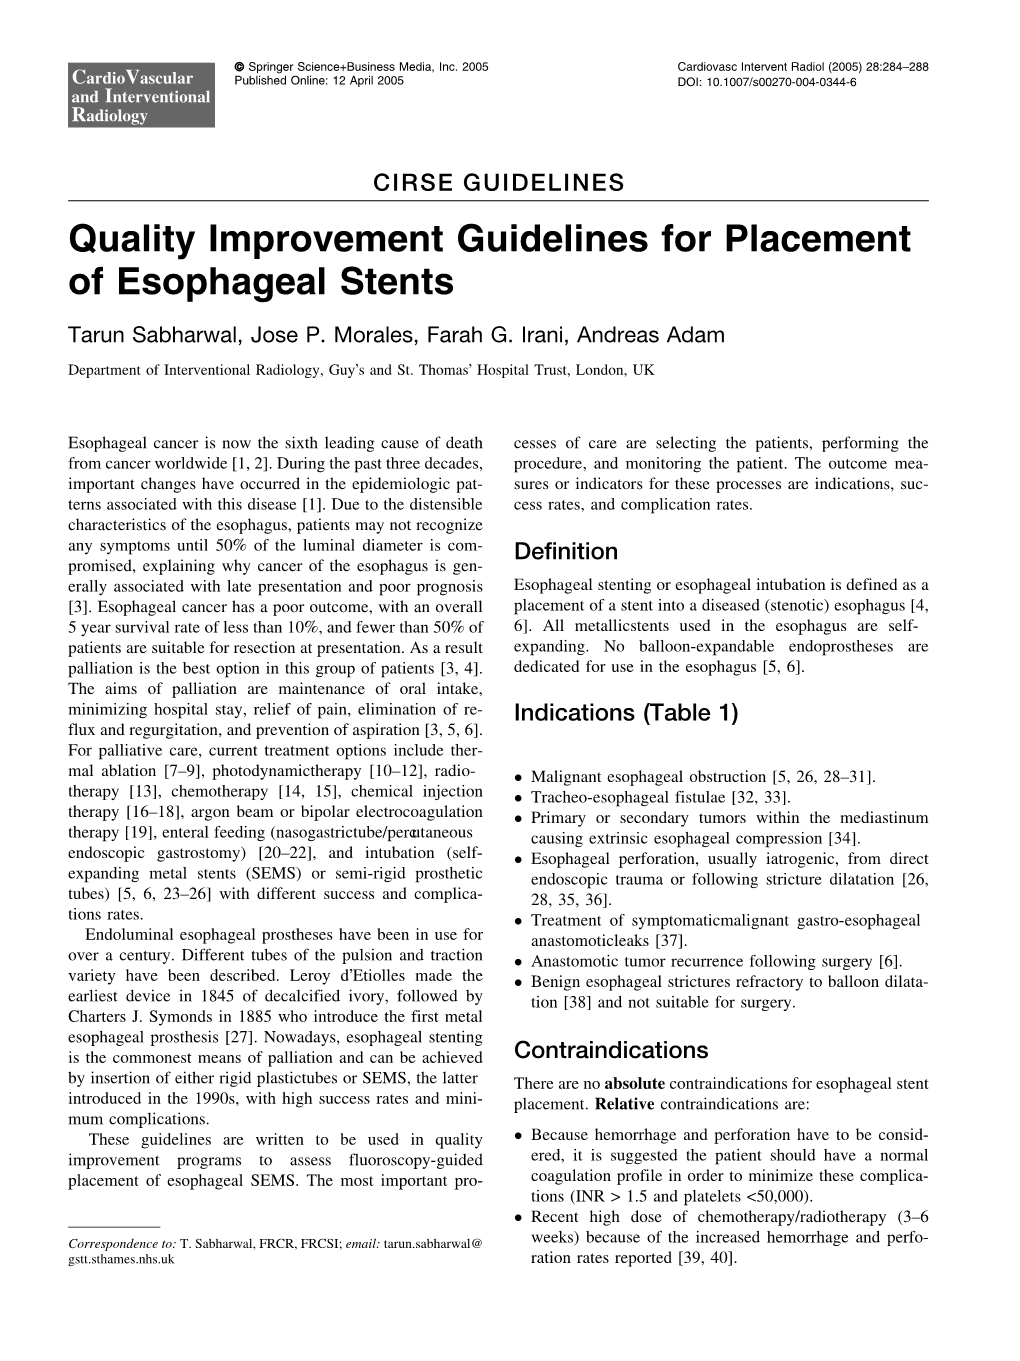 Quality Improvement Guidelines for Placement of Esophageal Stents